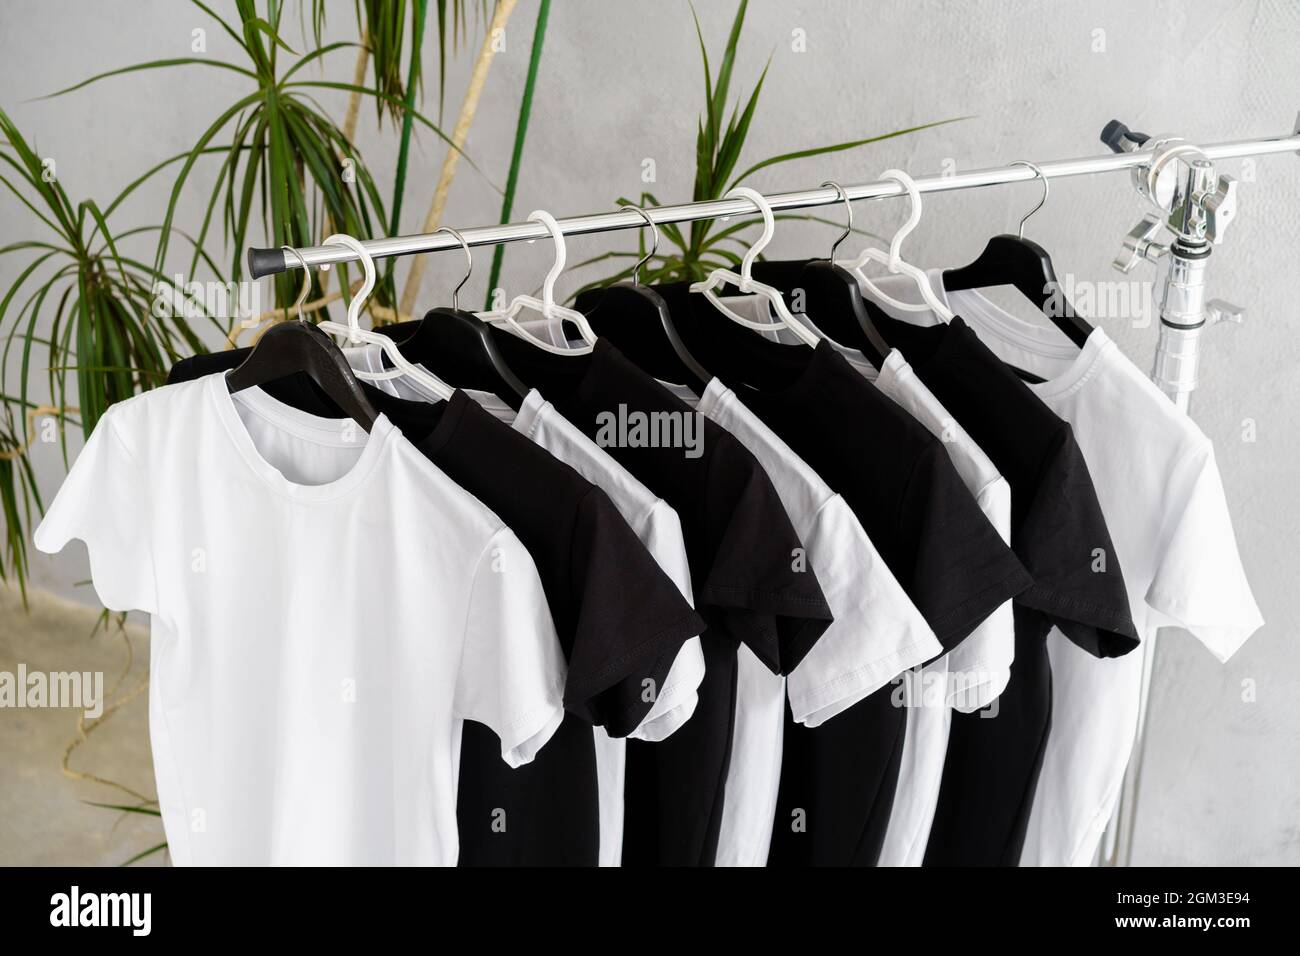 Row of black and white t-shirts hanging on rack Stock Photo